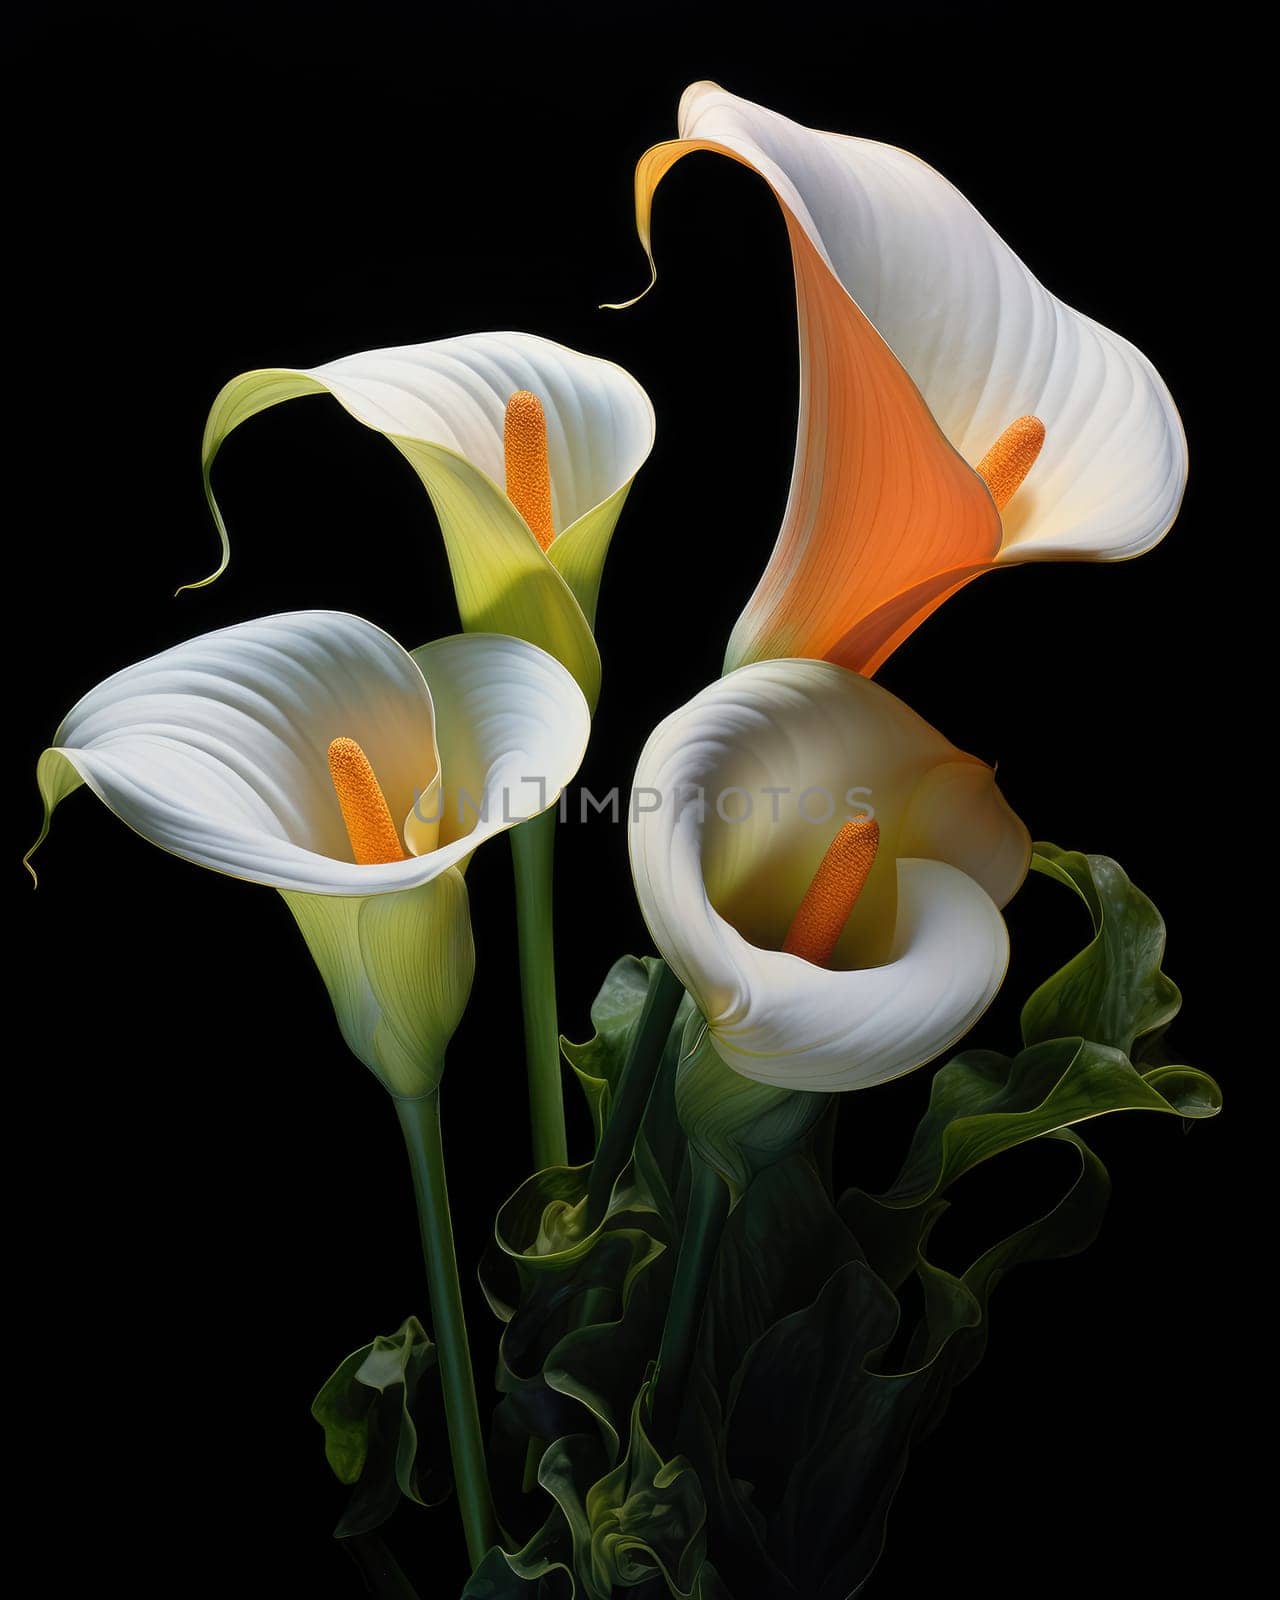 Romantic bouquet of calla lilies in minimalistic style on a dark background